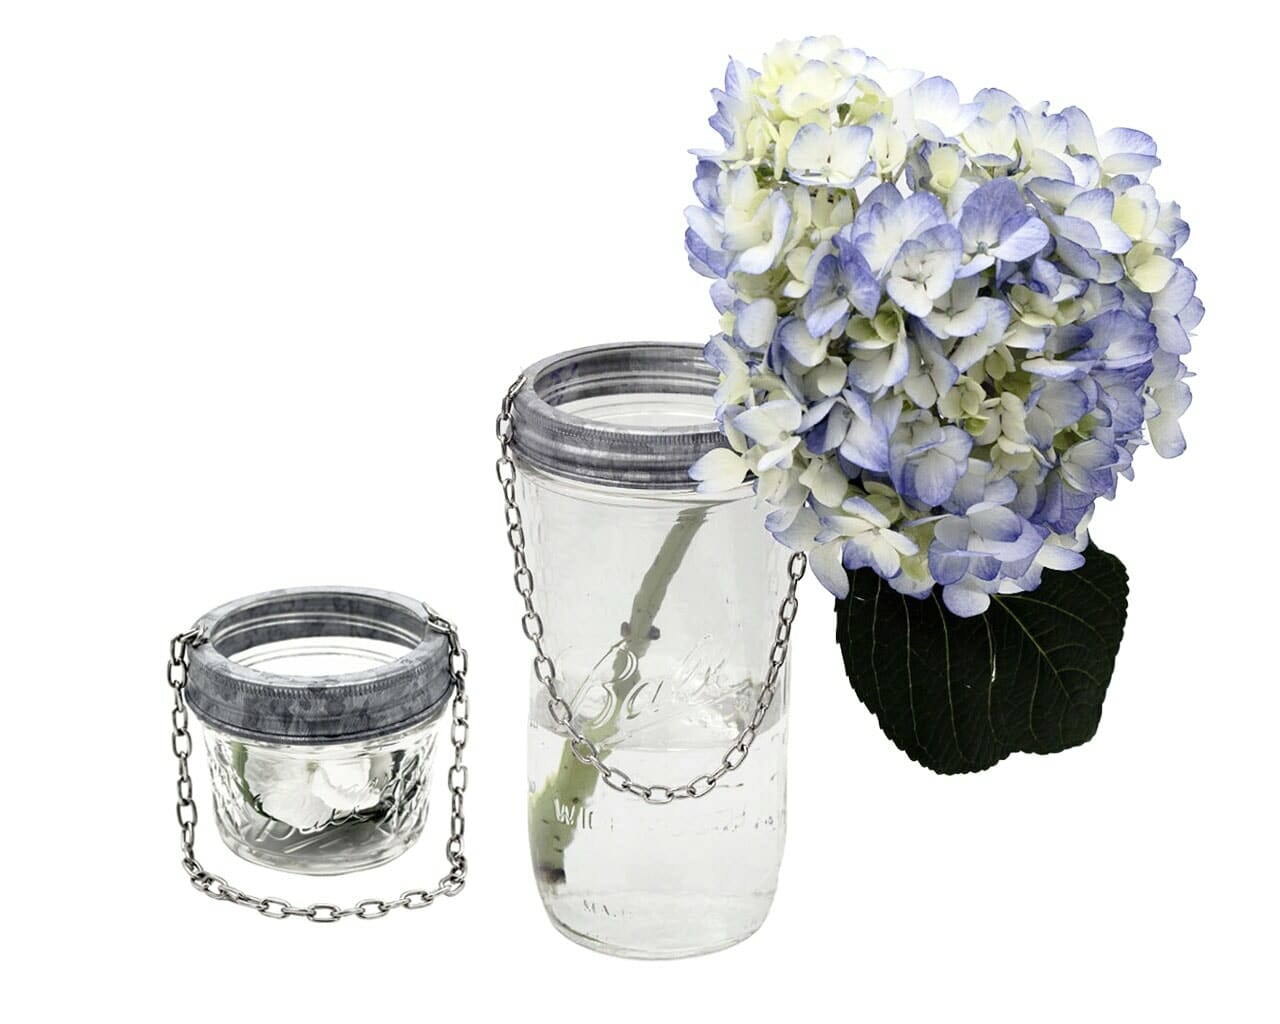 Galvanized Metal Band with Chain for Regular and Wide Mouth Mason Jars